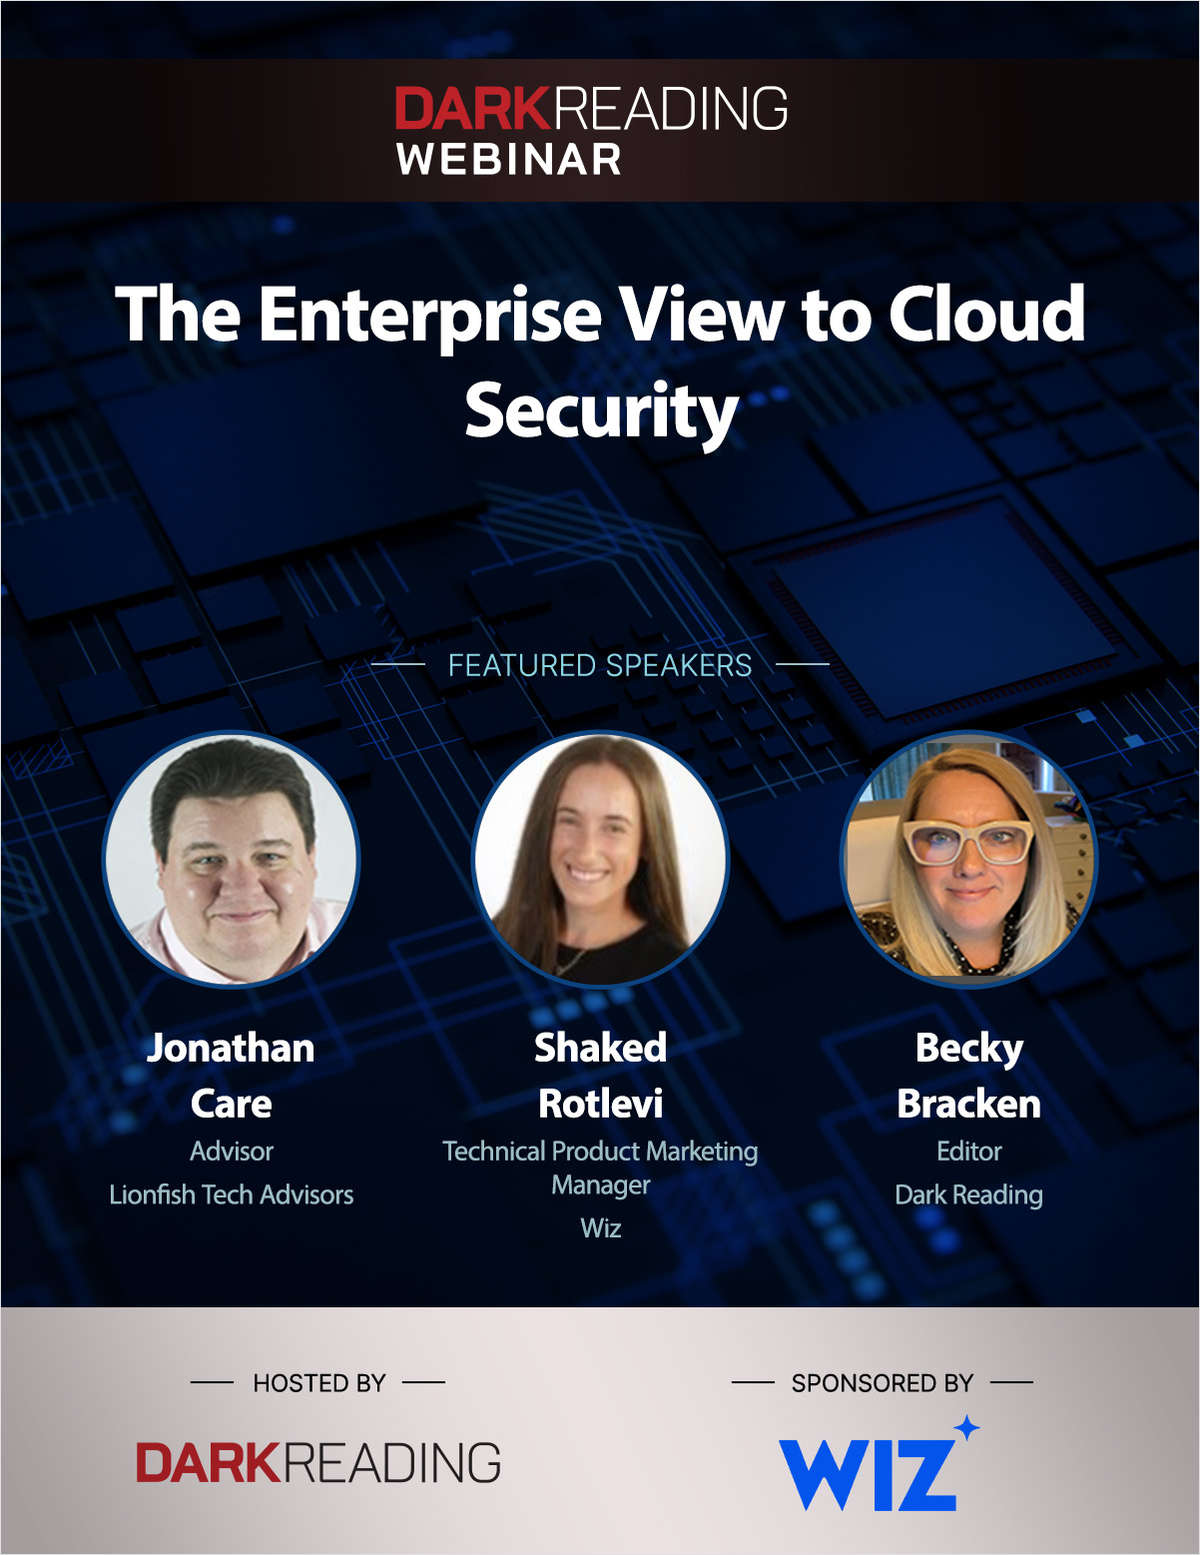 The Enterprise View to Cloud Security